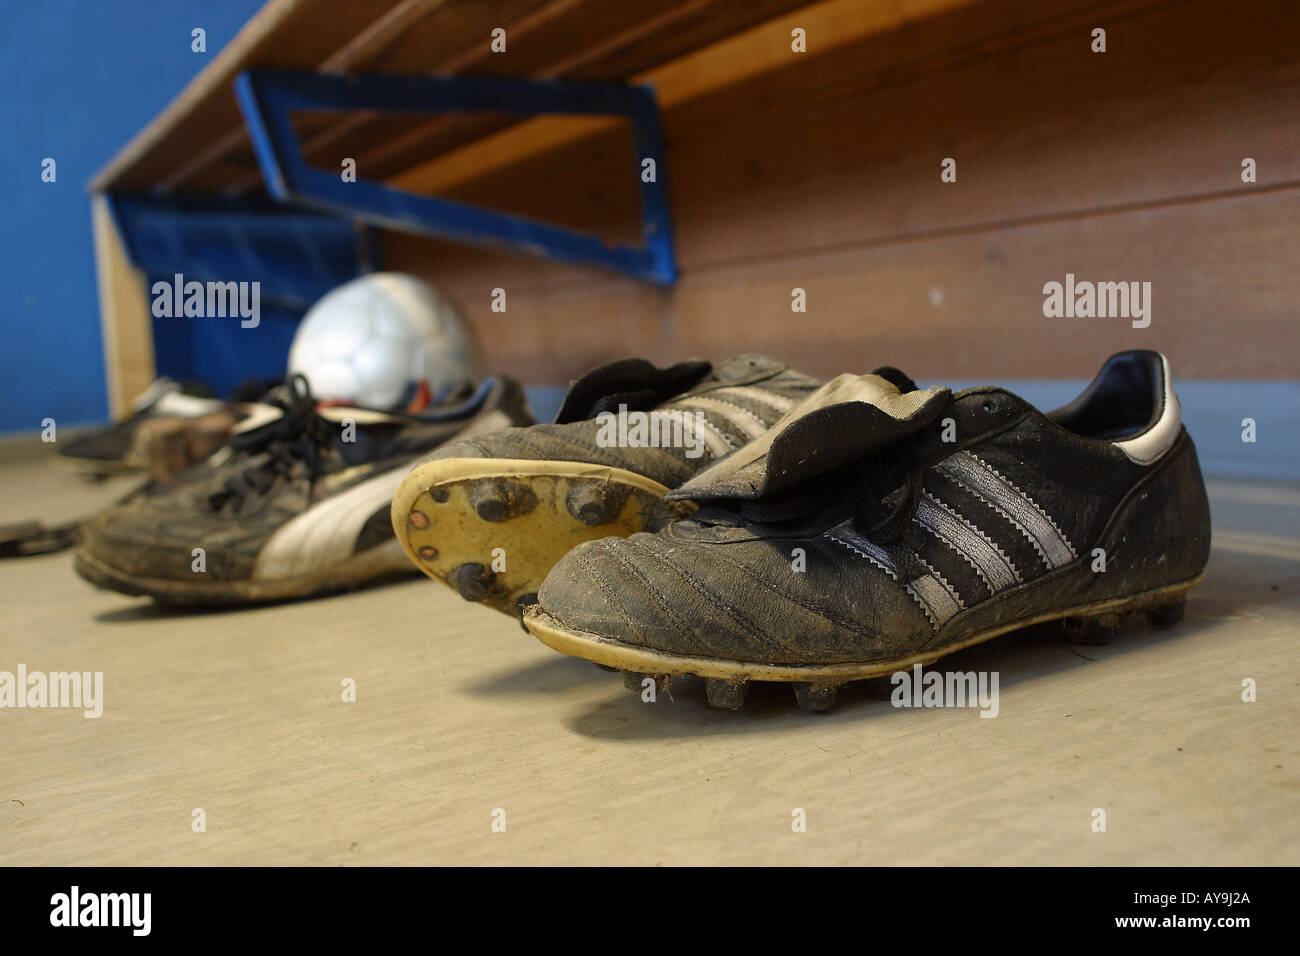 Fussball schuhe High Resolution Stock Photography and Images - Alamy